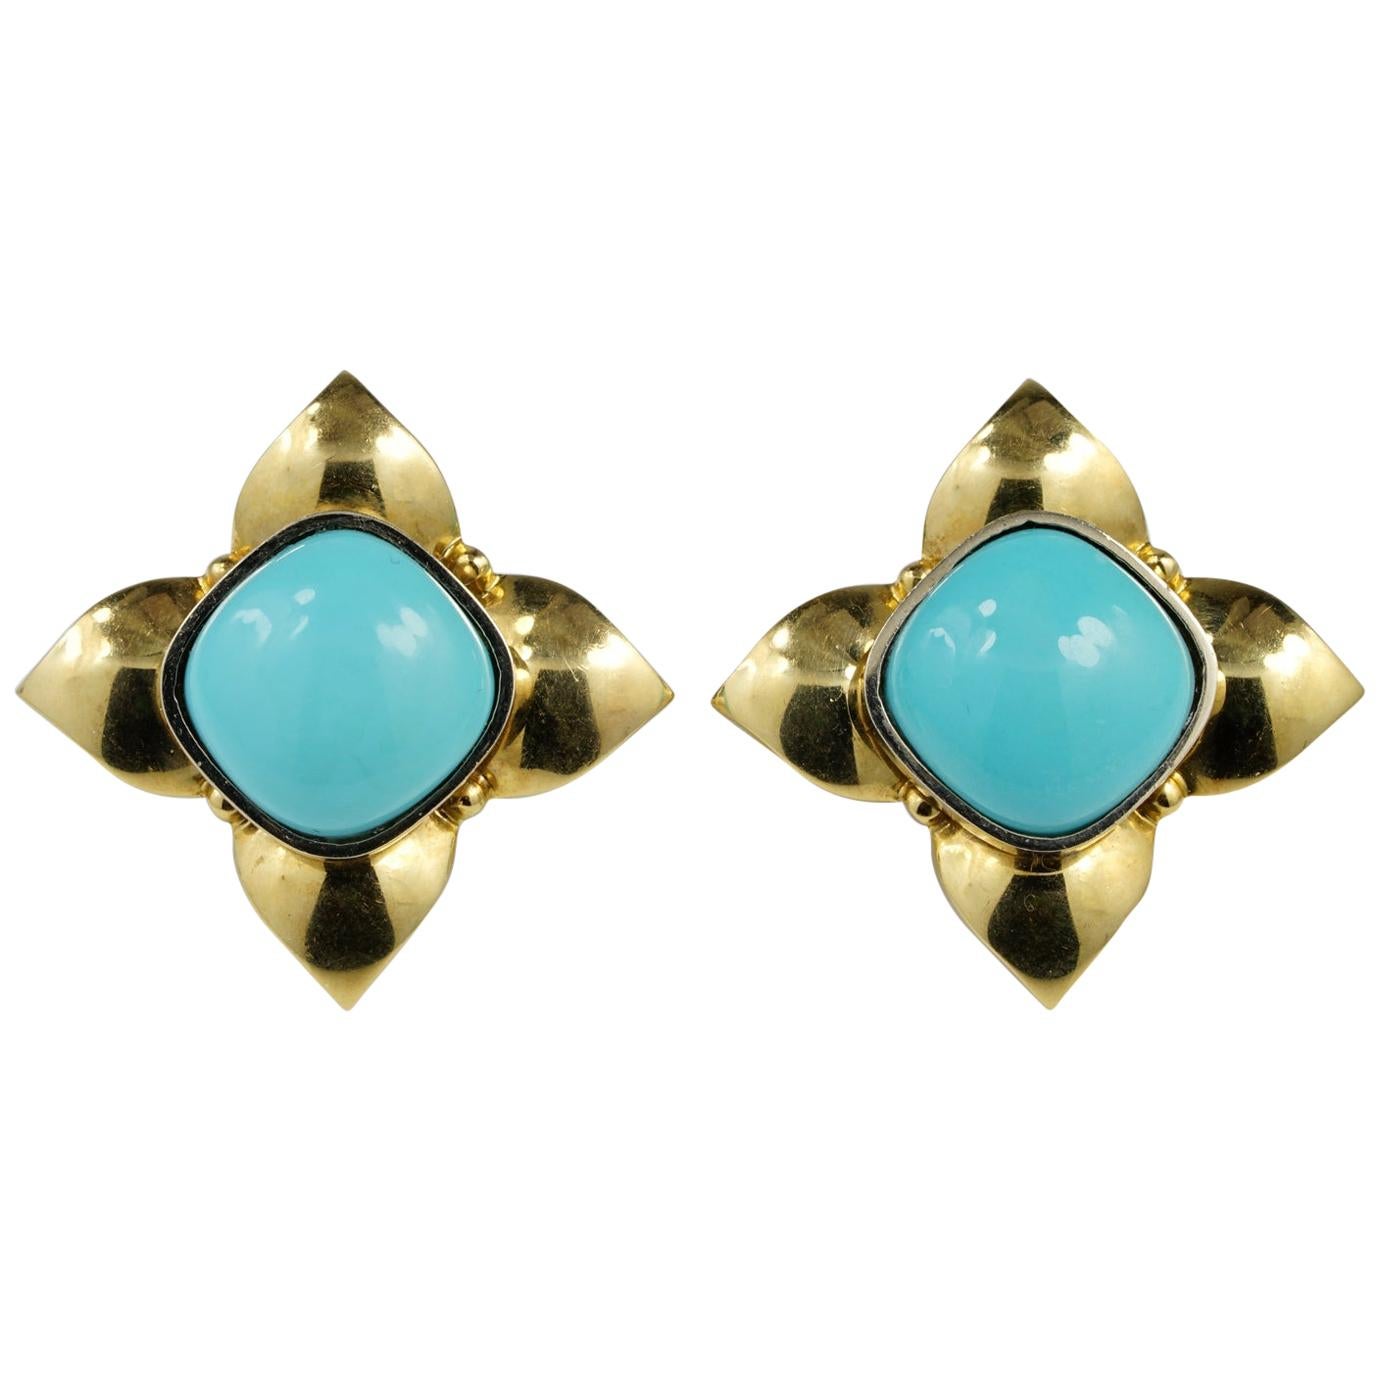 Outstanding Natural Persian Turquoise Solitaire Earrings For Sale